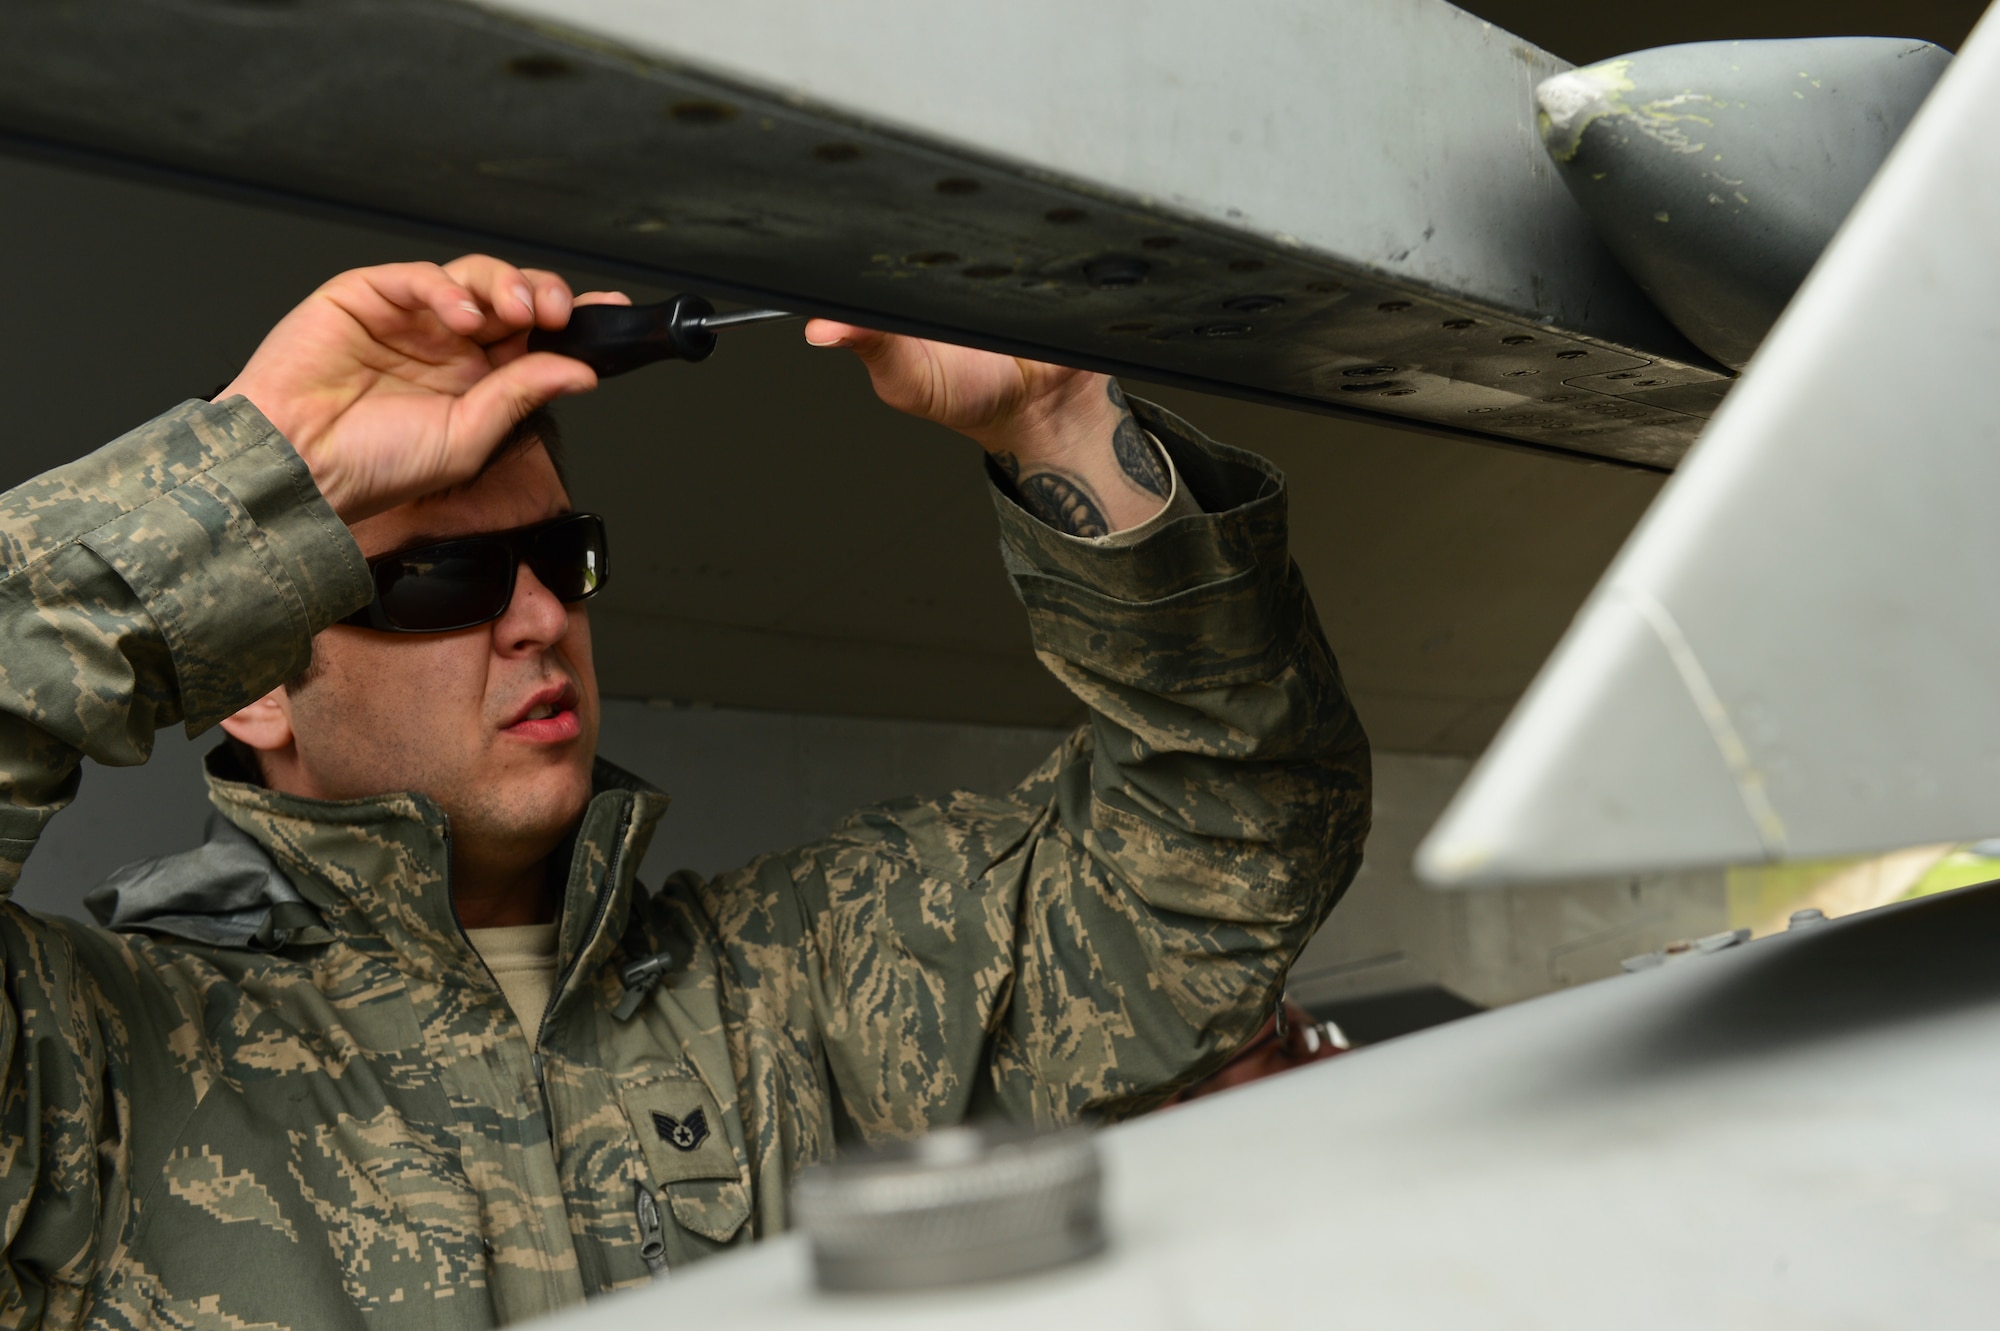 Staff Sgt. Jason Trehearne, 493rd Aircraft Maintenance Unit weapons load crew member, installs a buffer on a LAU-128 missile launcher, during exercise Real Thaw at Beja Air Base, Portugal, Feb. 25, 2016. Real Thaw was designed to provide joint interoperability training through the execution of a vast range of battlefield missions, to include day and night operations in a high intensity joint setting. (U.S. Air Force photo by Senior Airman Dawn M. Weber/Released)